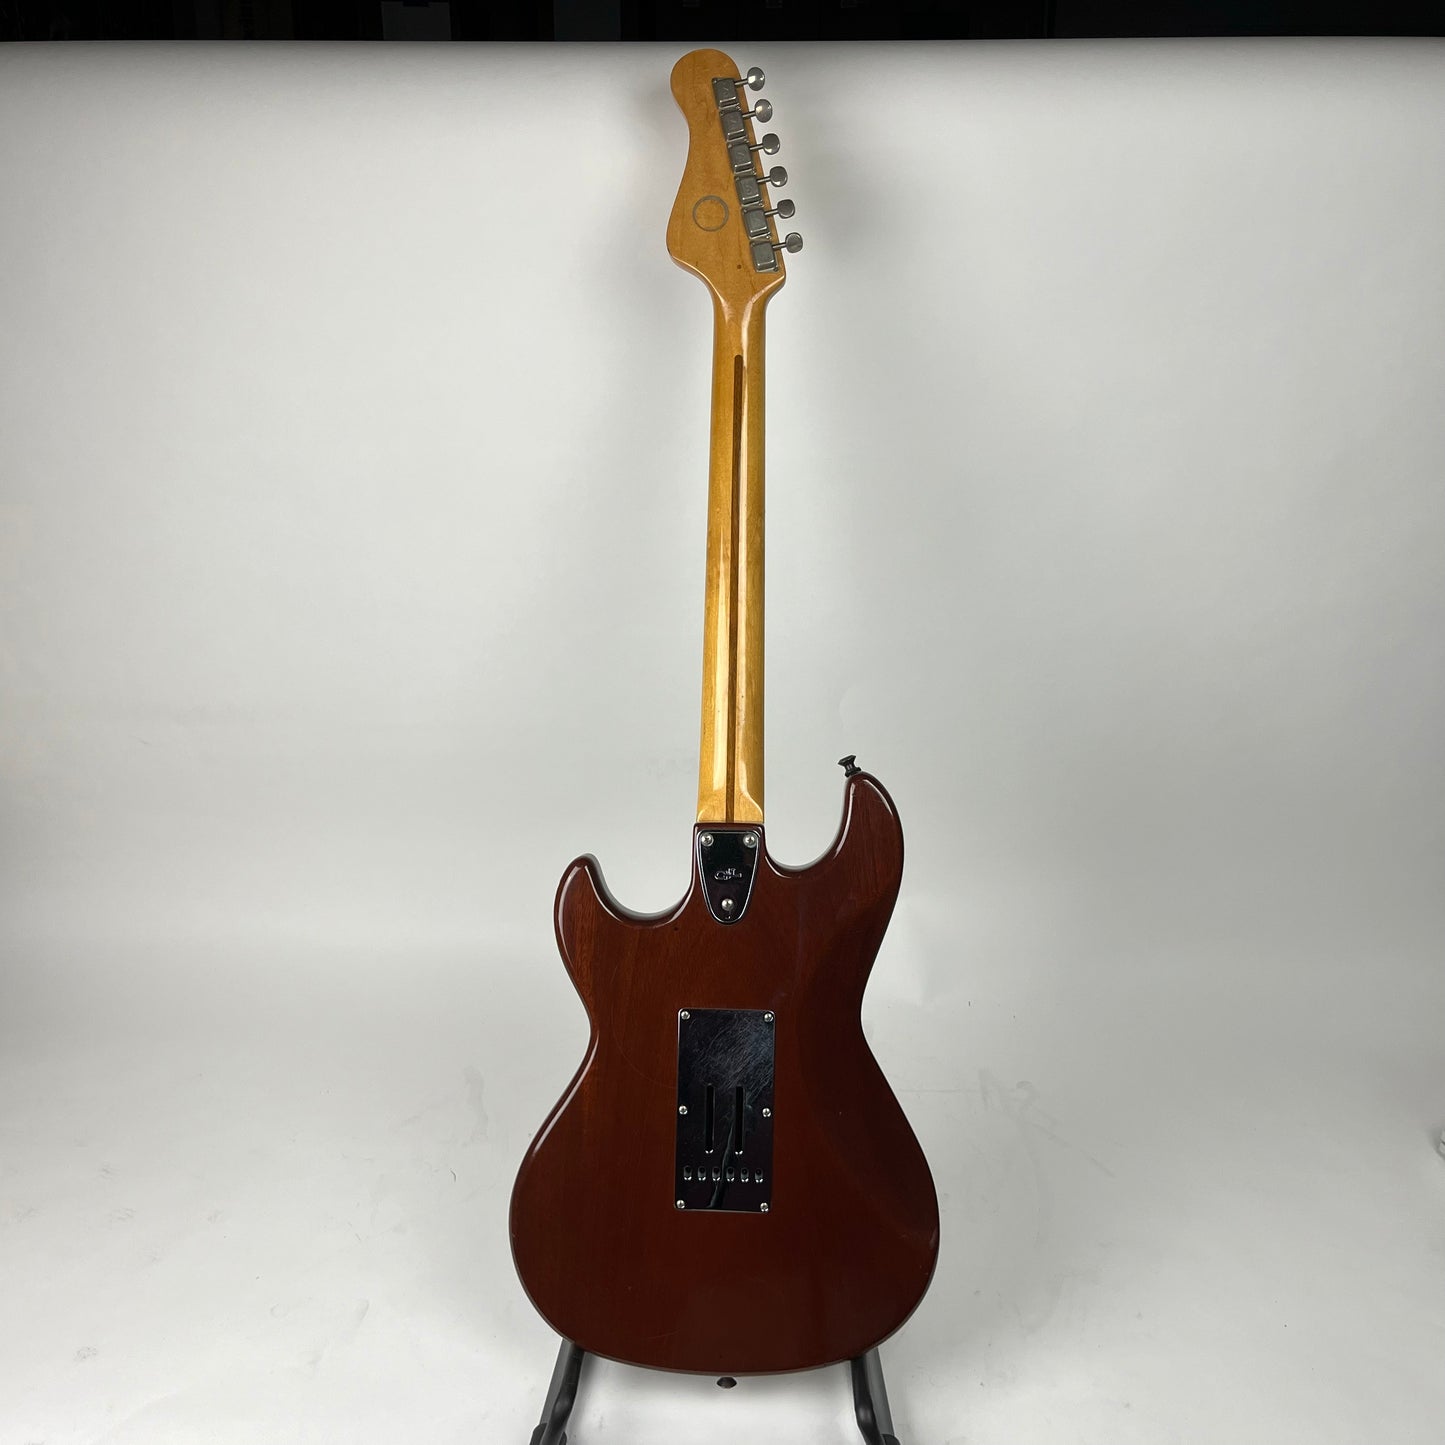 G&L F-100 Guitar Series II, 1980's, excellent condition